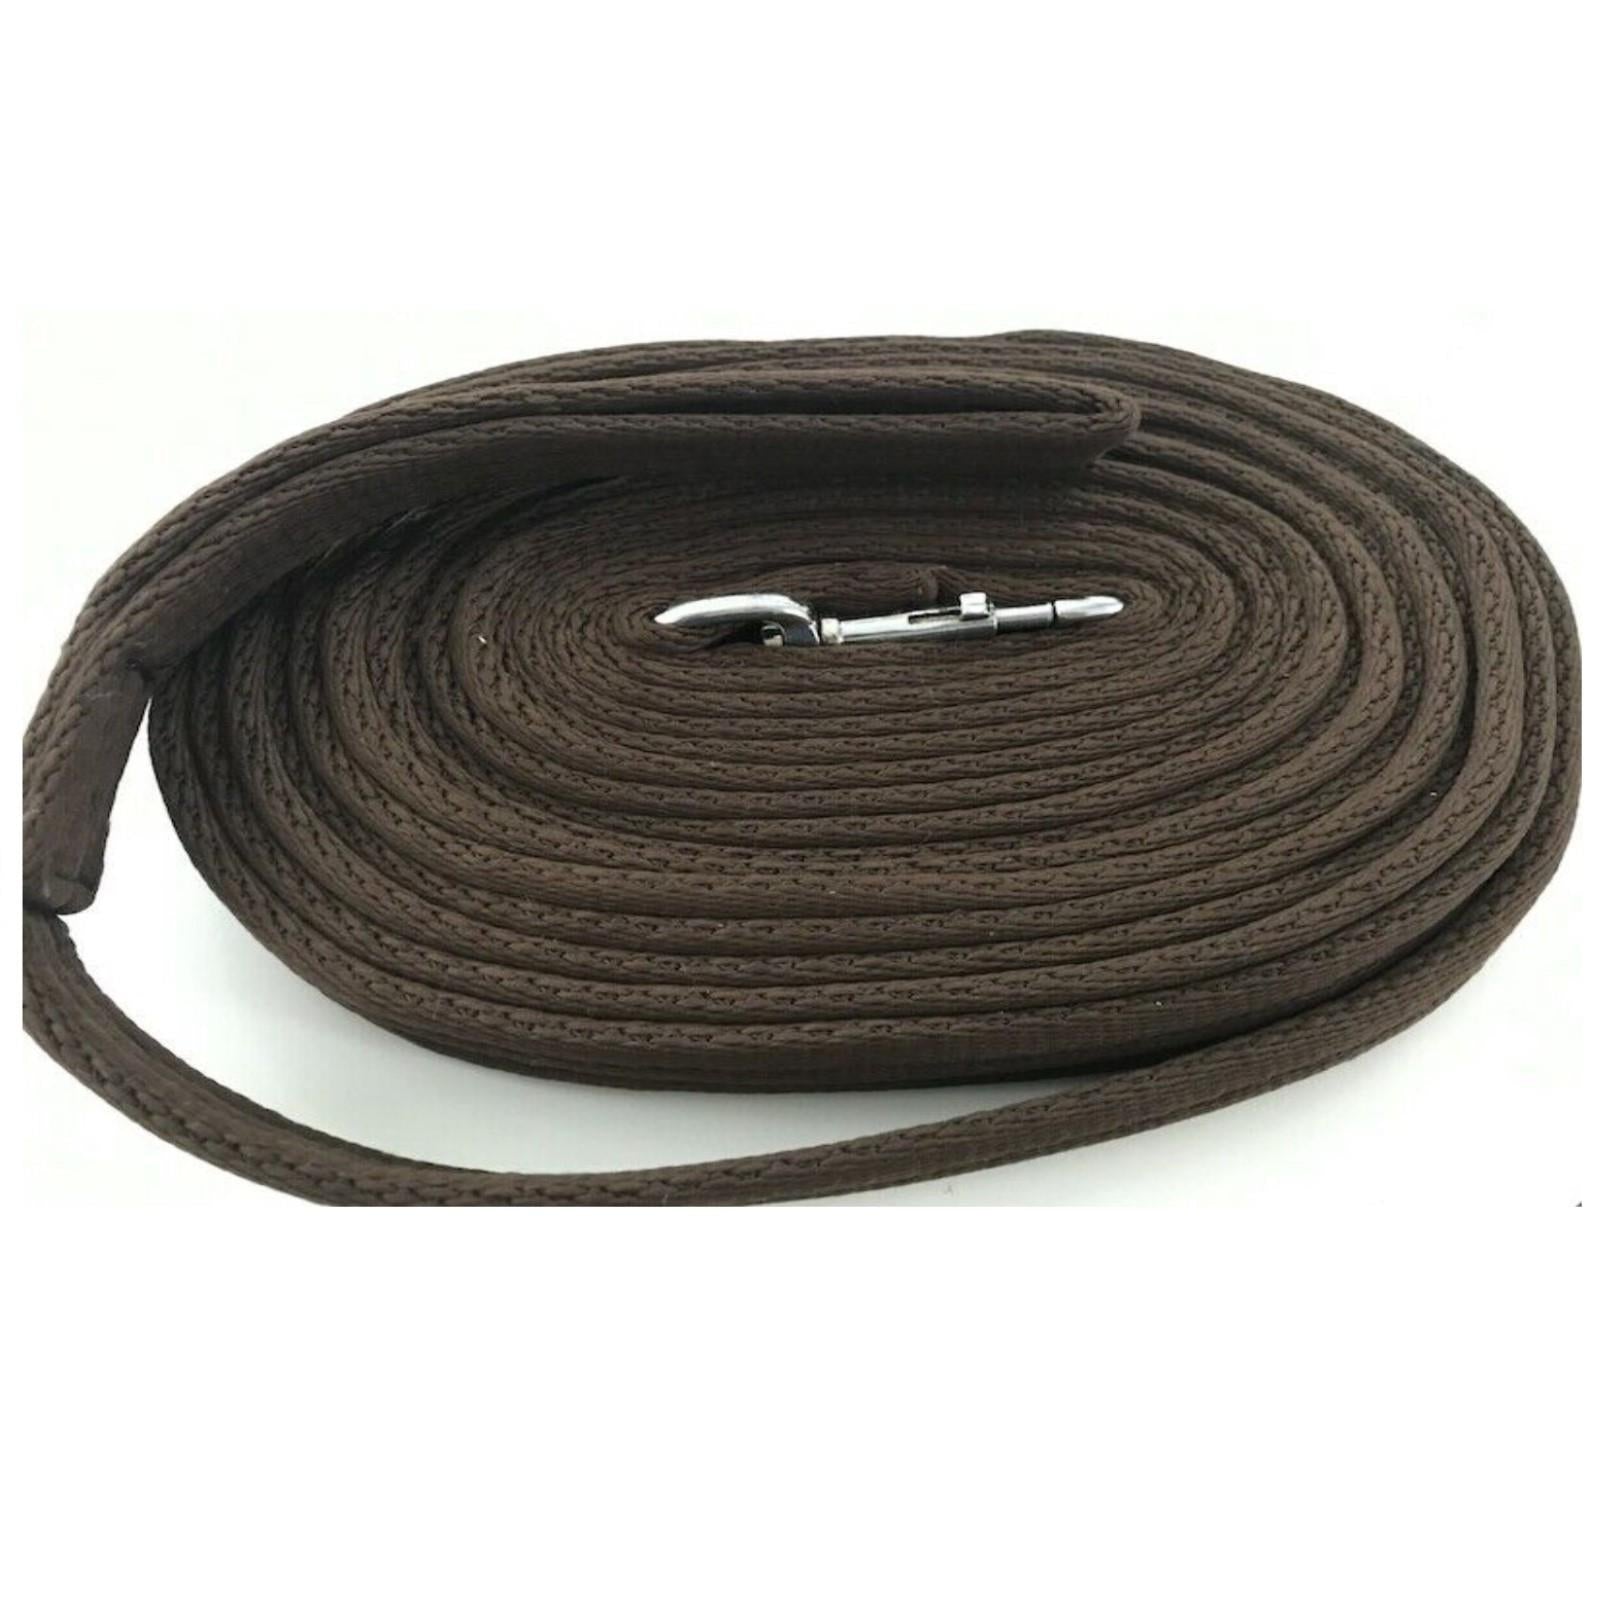 8 Metre Soft Padded Lunging Rein Pony Horse Training Long Lunge Line 22 Colours